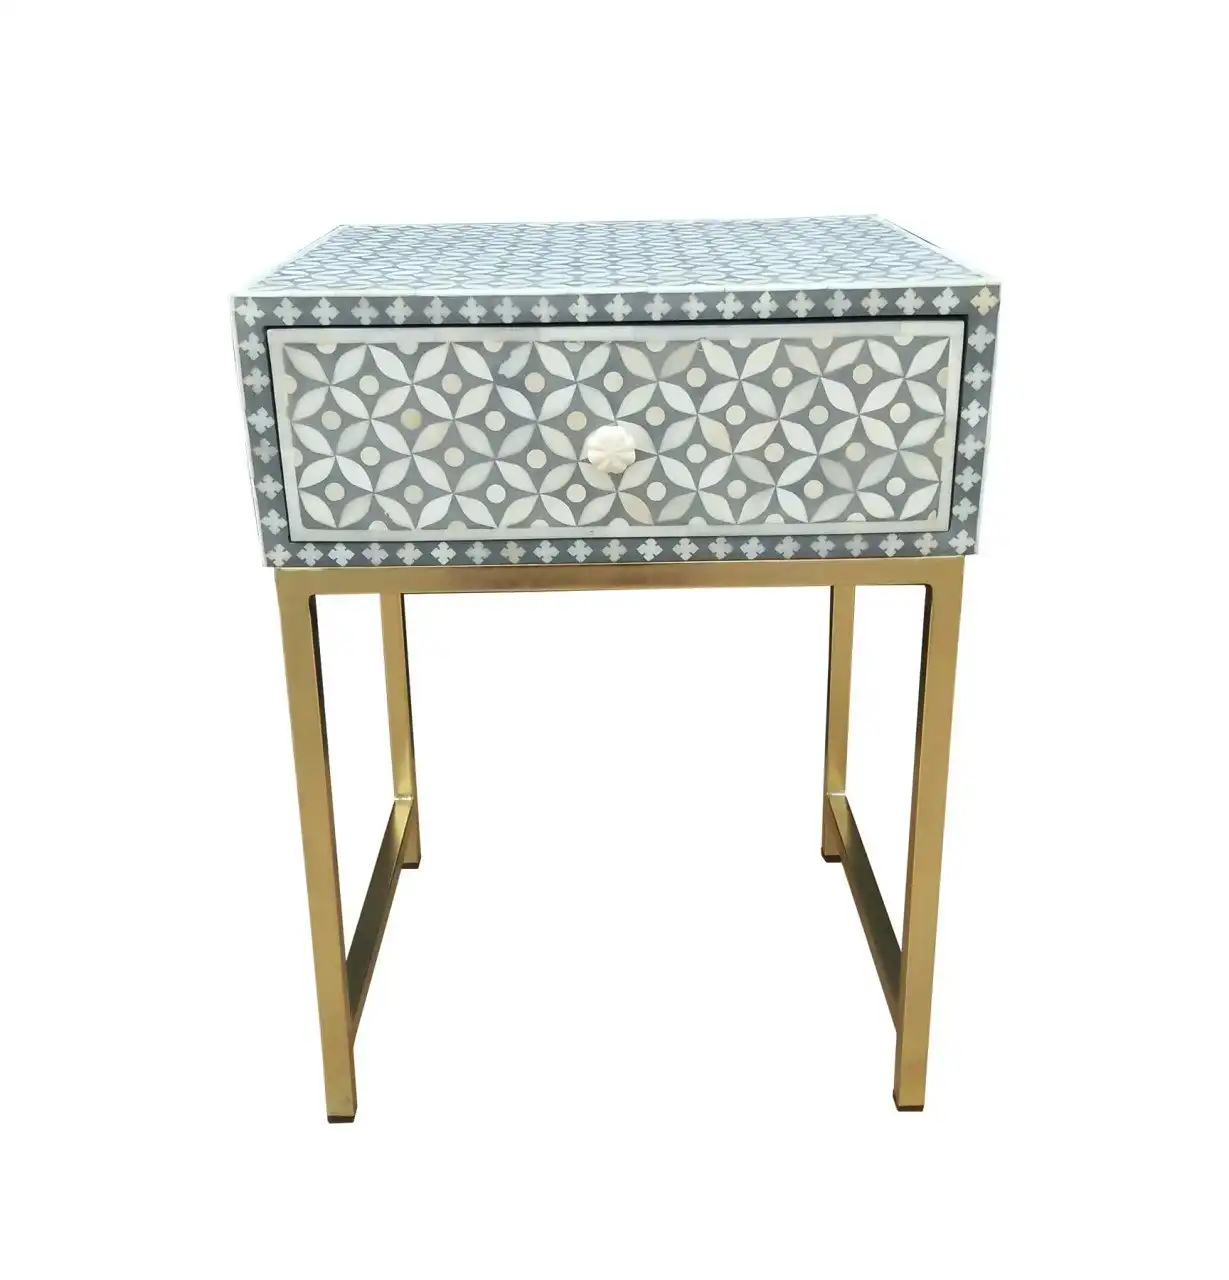 Zohi Interiors Bone Inlay Bedside Table with One Drawer in Celtic/Grey